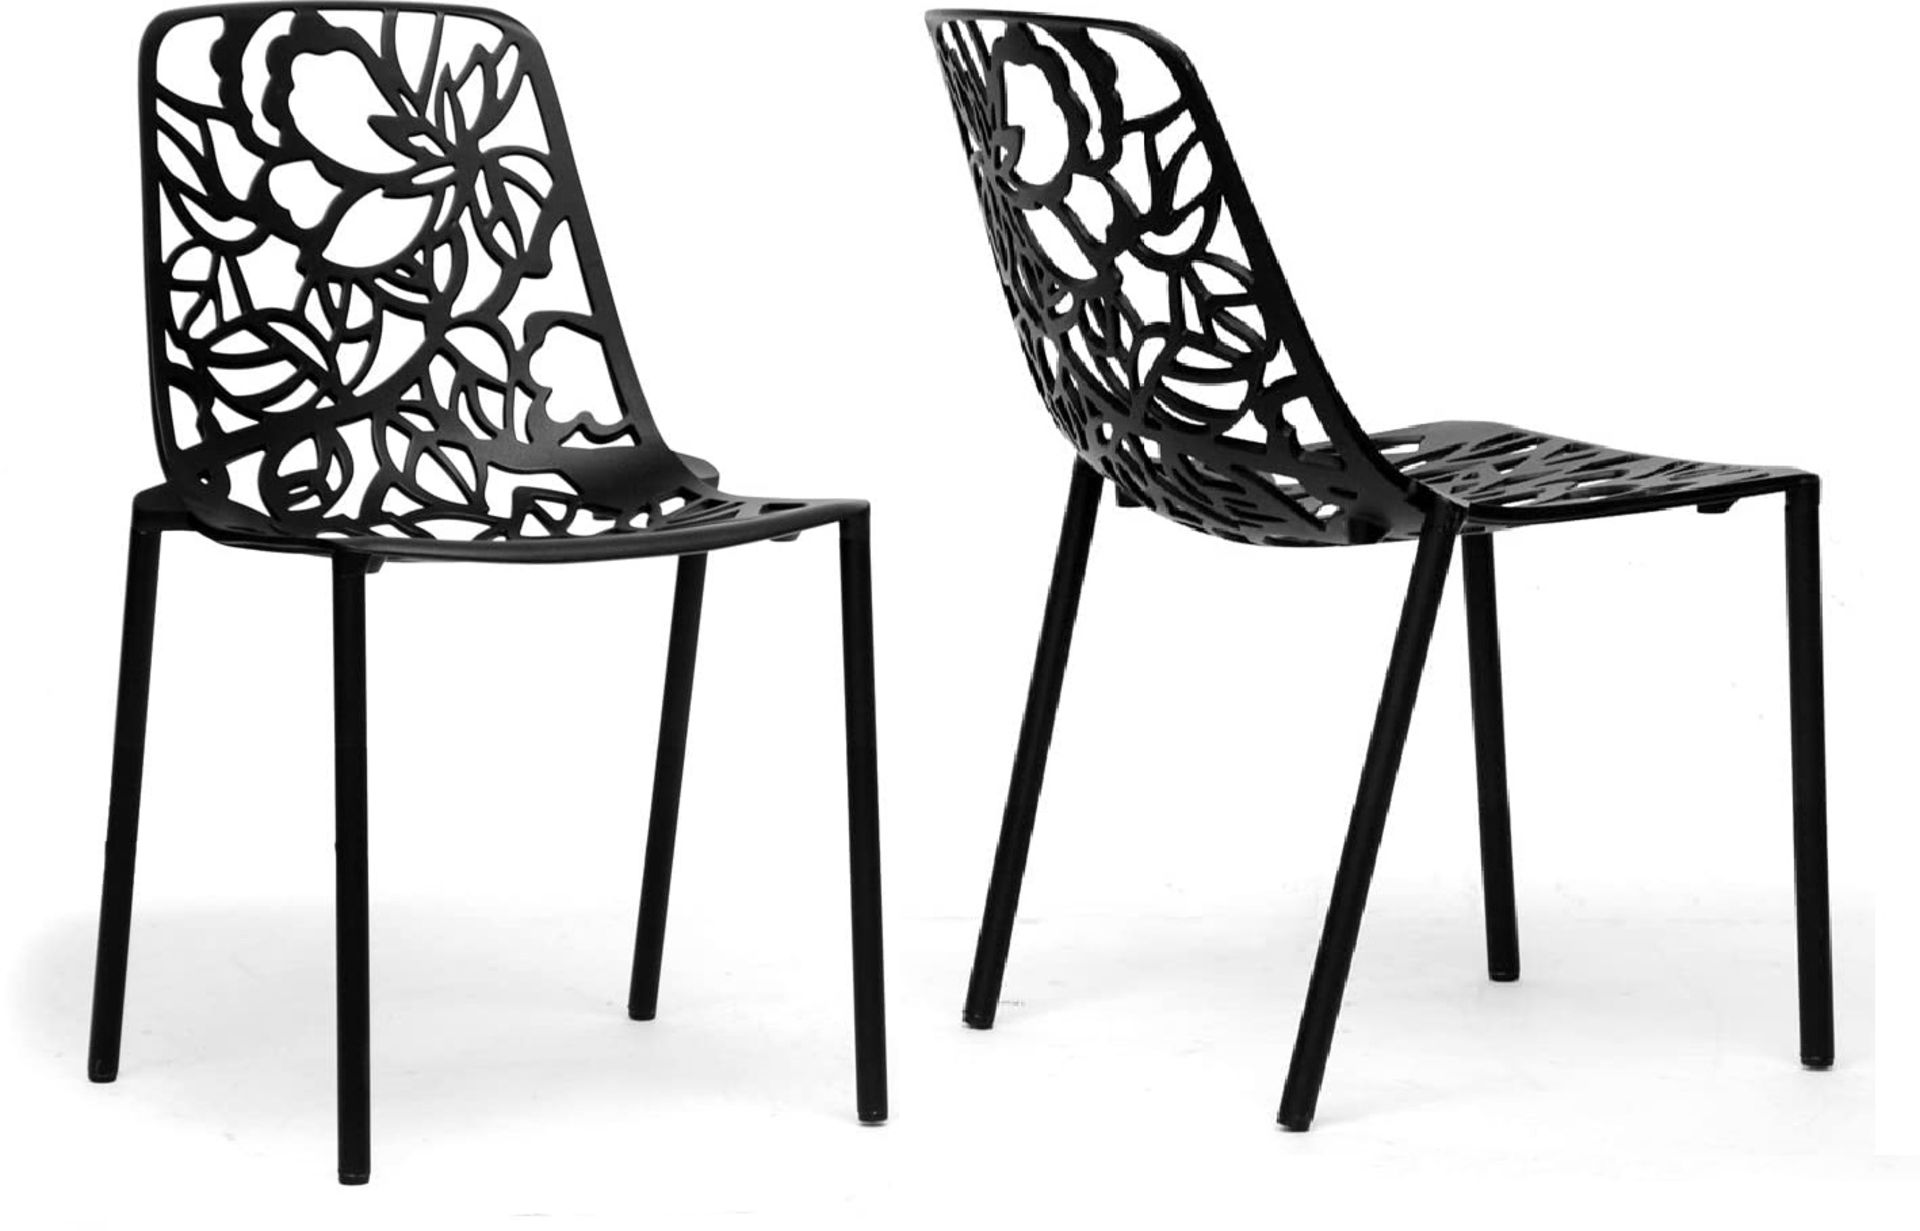 4 x Metal Modern Designer Dining Chairs With A Floral Filigree Design - Brand New Boxed Stock